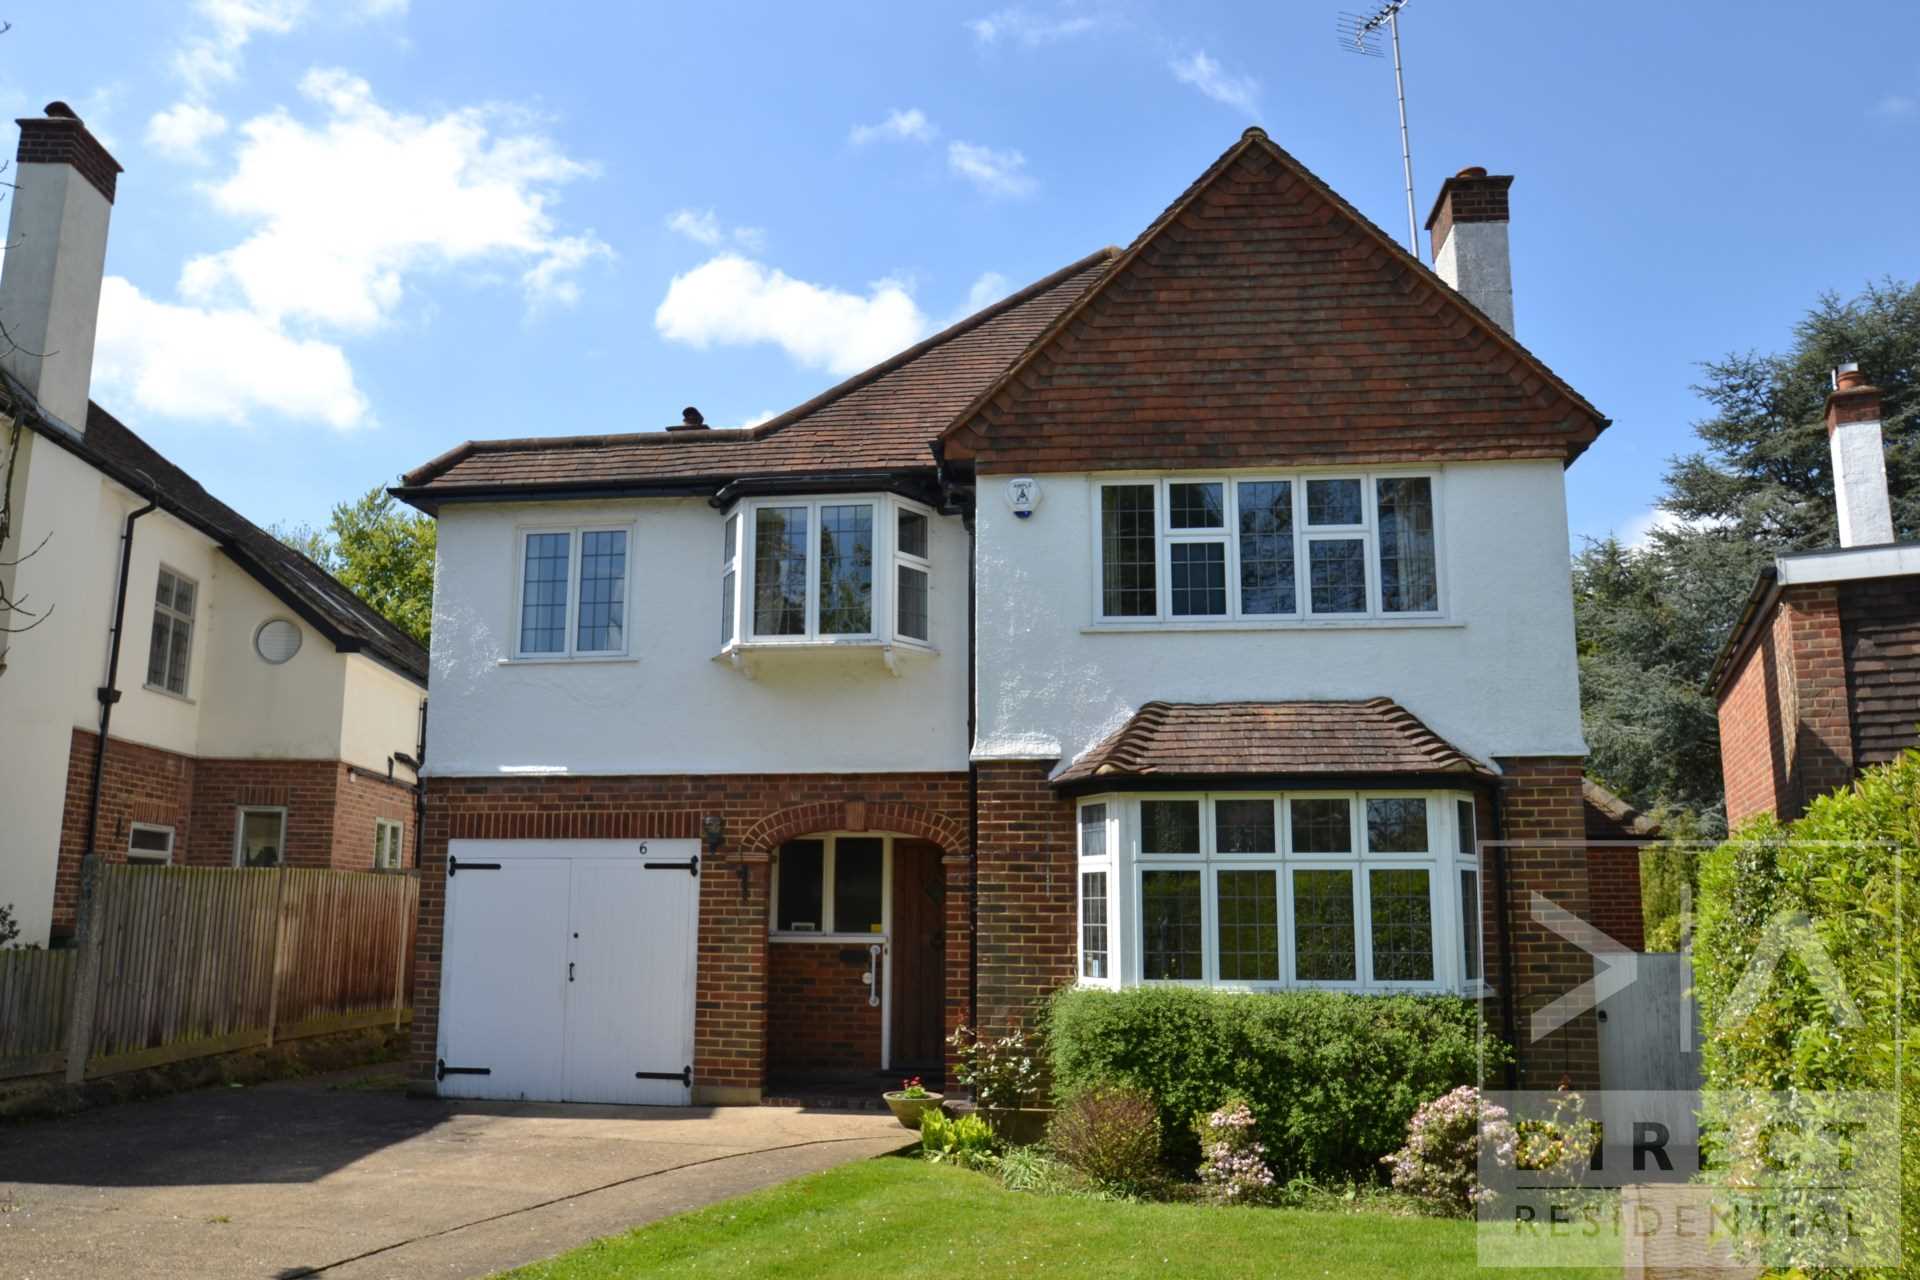 4 bed Detached House for rent in Ashtead. From Direct Residential - Epsom